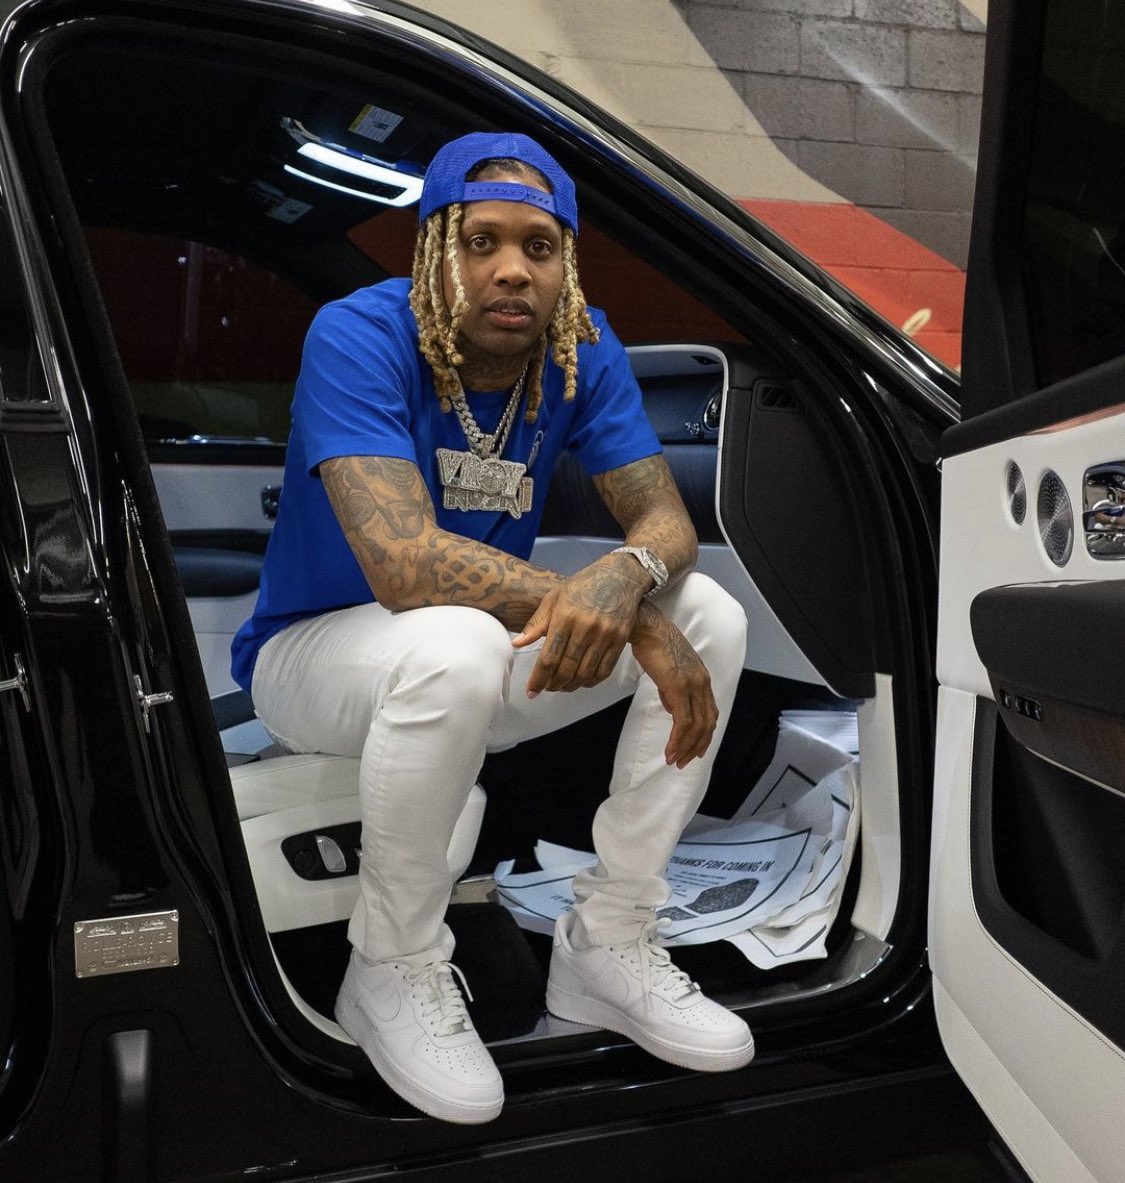 DeAndre Henry on X: RT @HotFreestyle: Lil Durk says his new album is done  ✓  / X